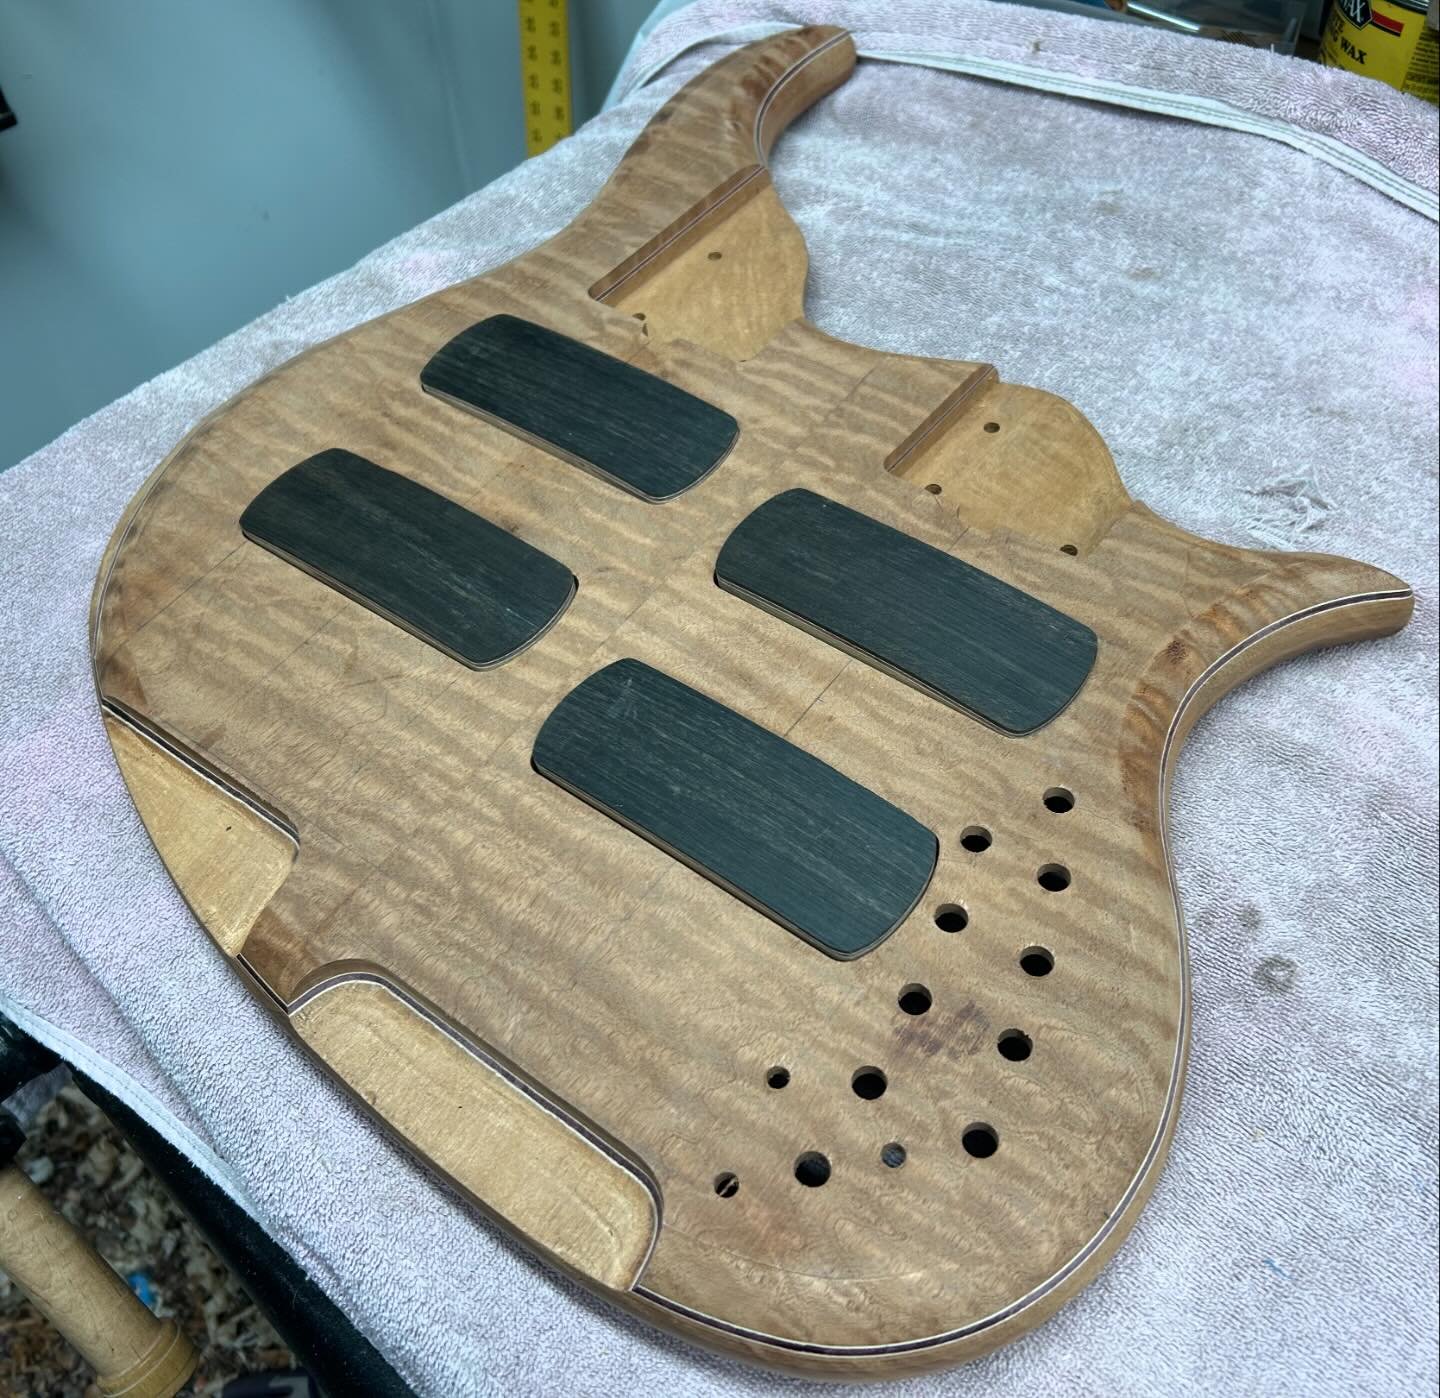 I made too many neck pockets and too many pickup cavities (and too many potentiometer and switch holes) on this one, but at least I made too many neck and zero headstocks to go along with it #doubleneck #doubleneckbass #6stringbass #6stringfretless #